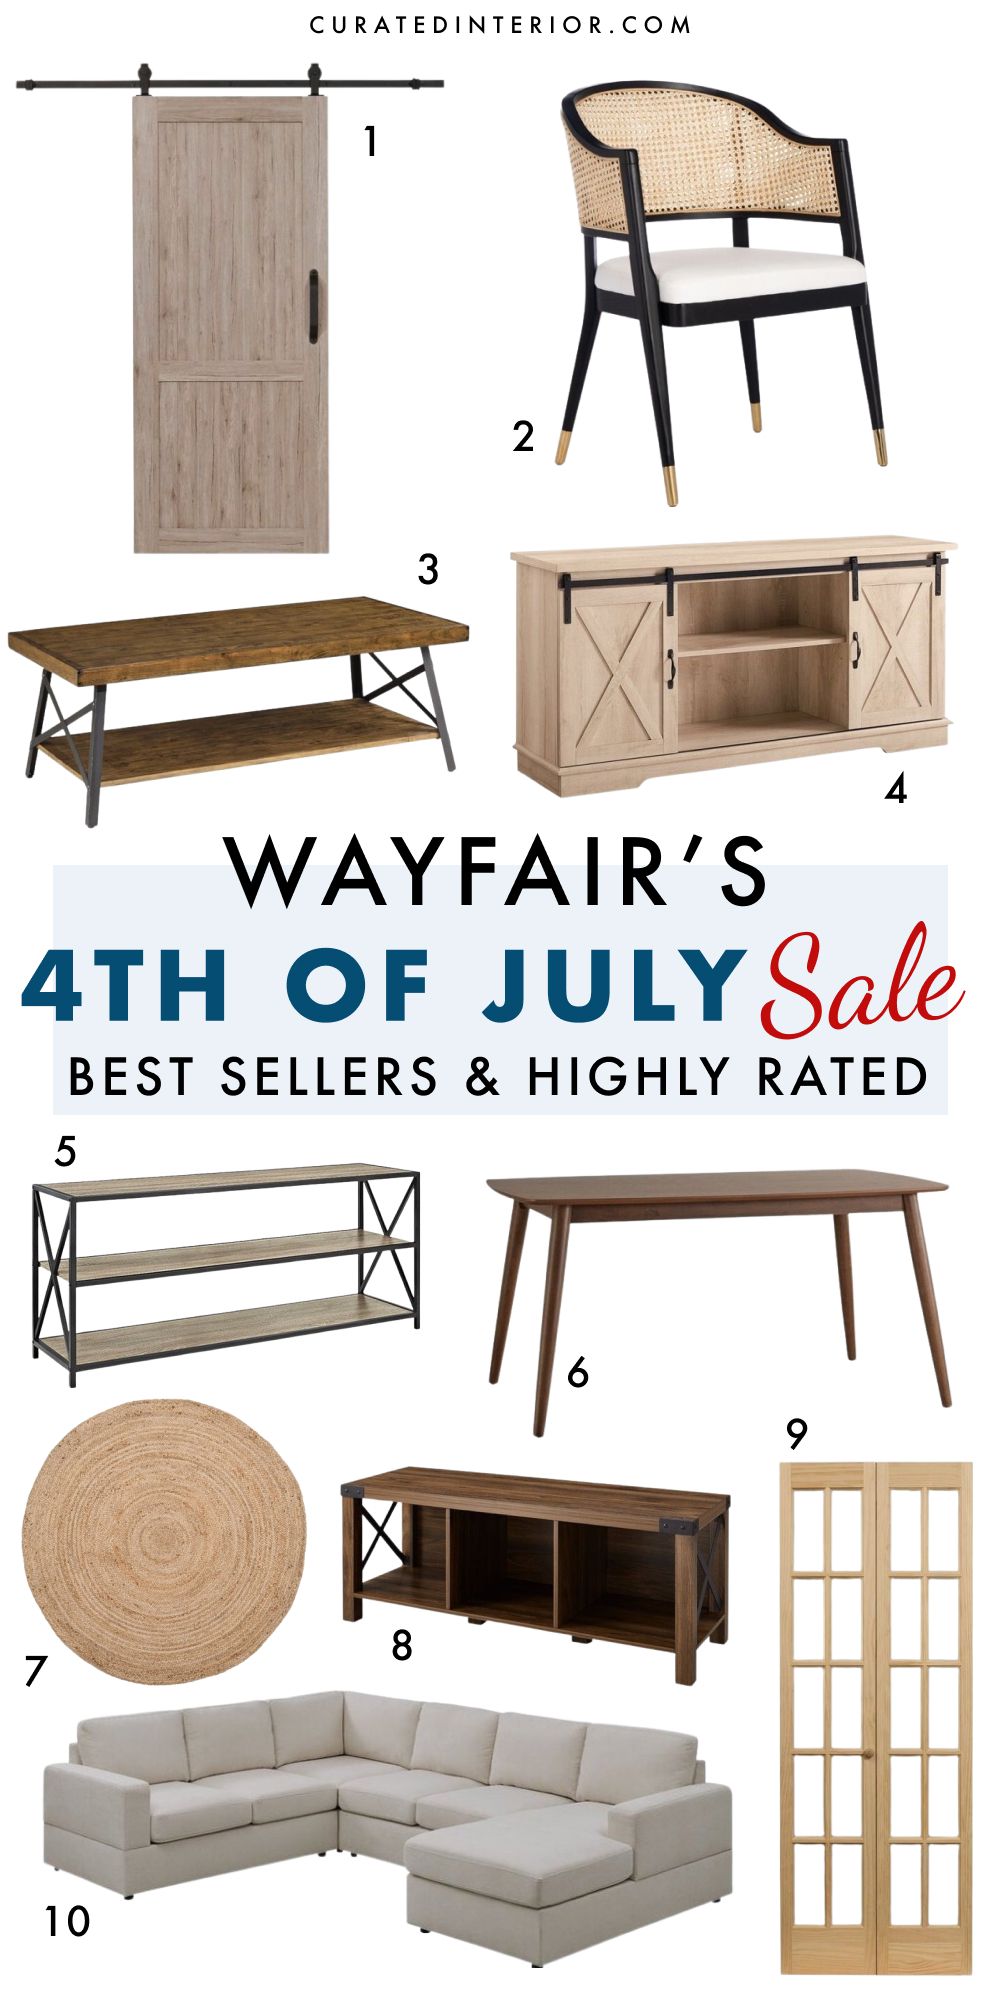 Wayfair 4th of July Home Decor Furniture Sales